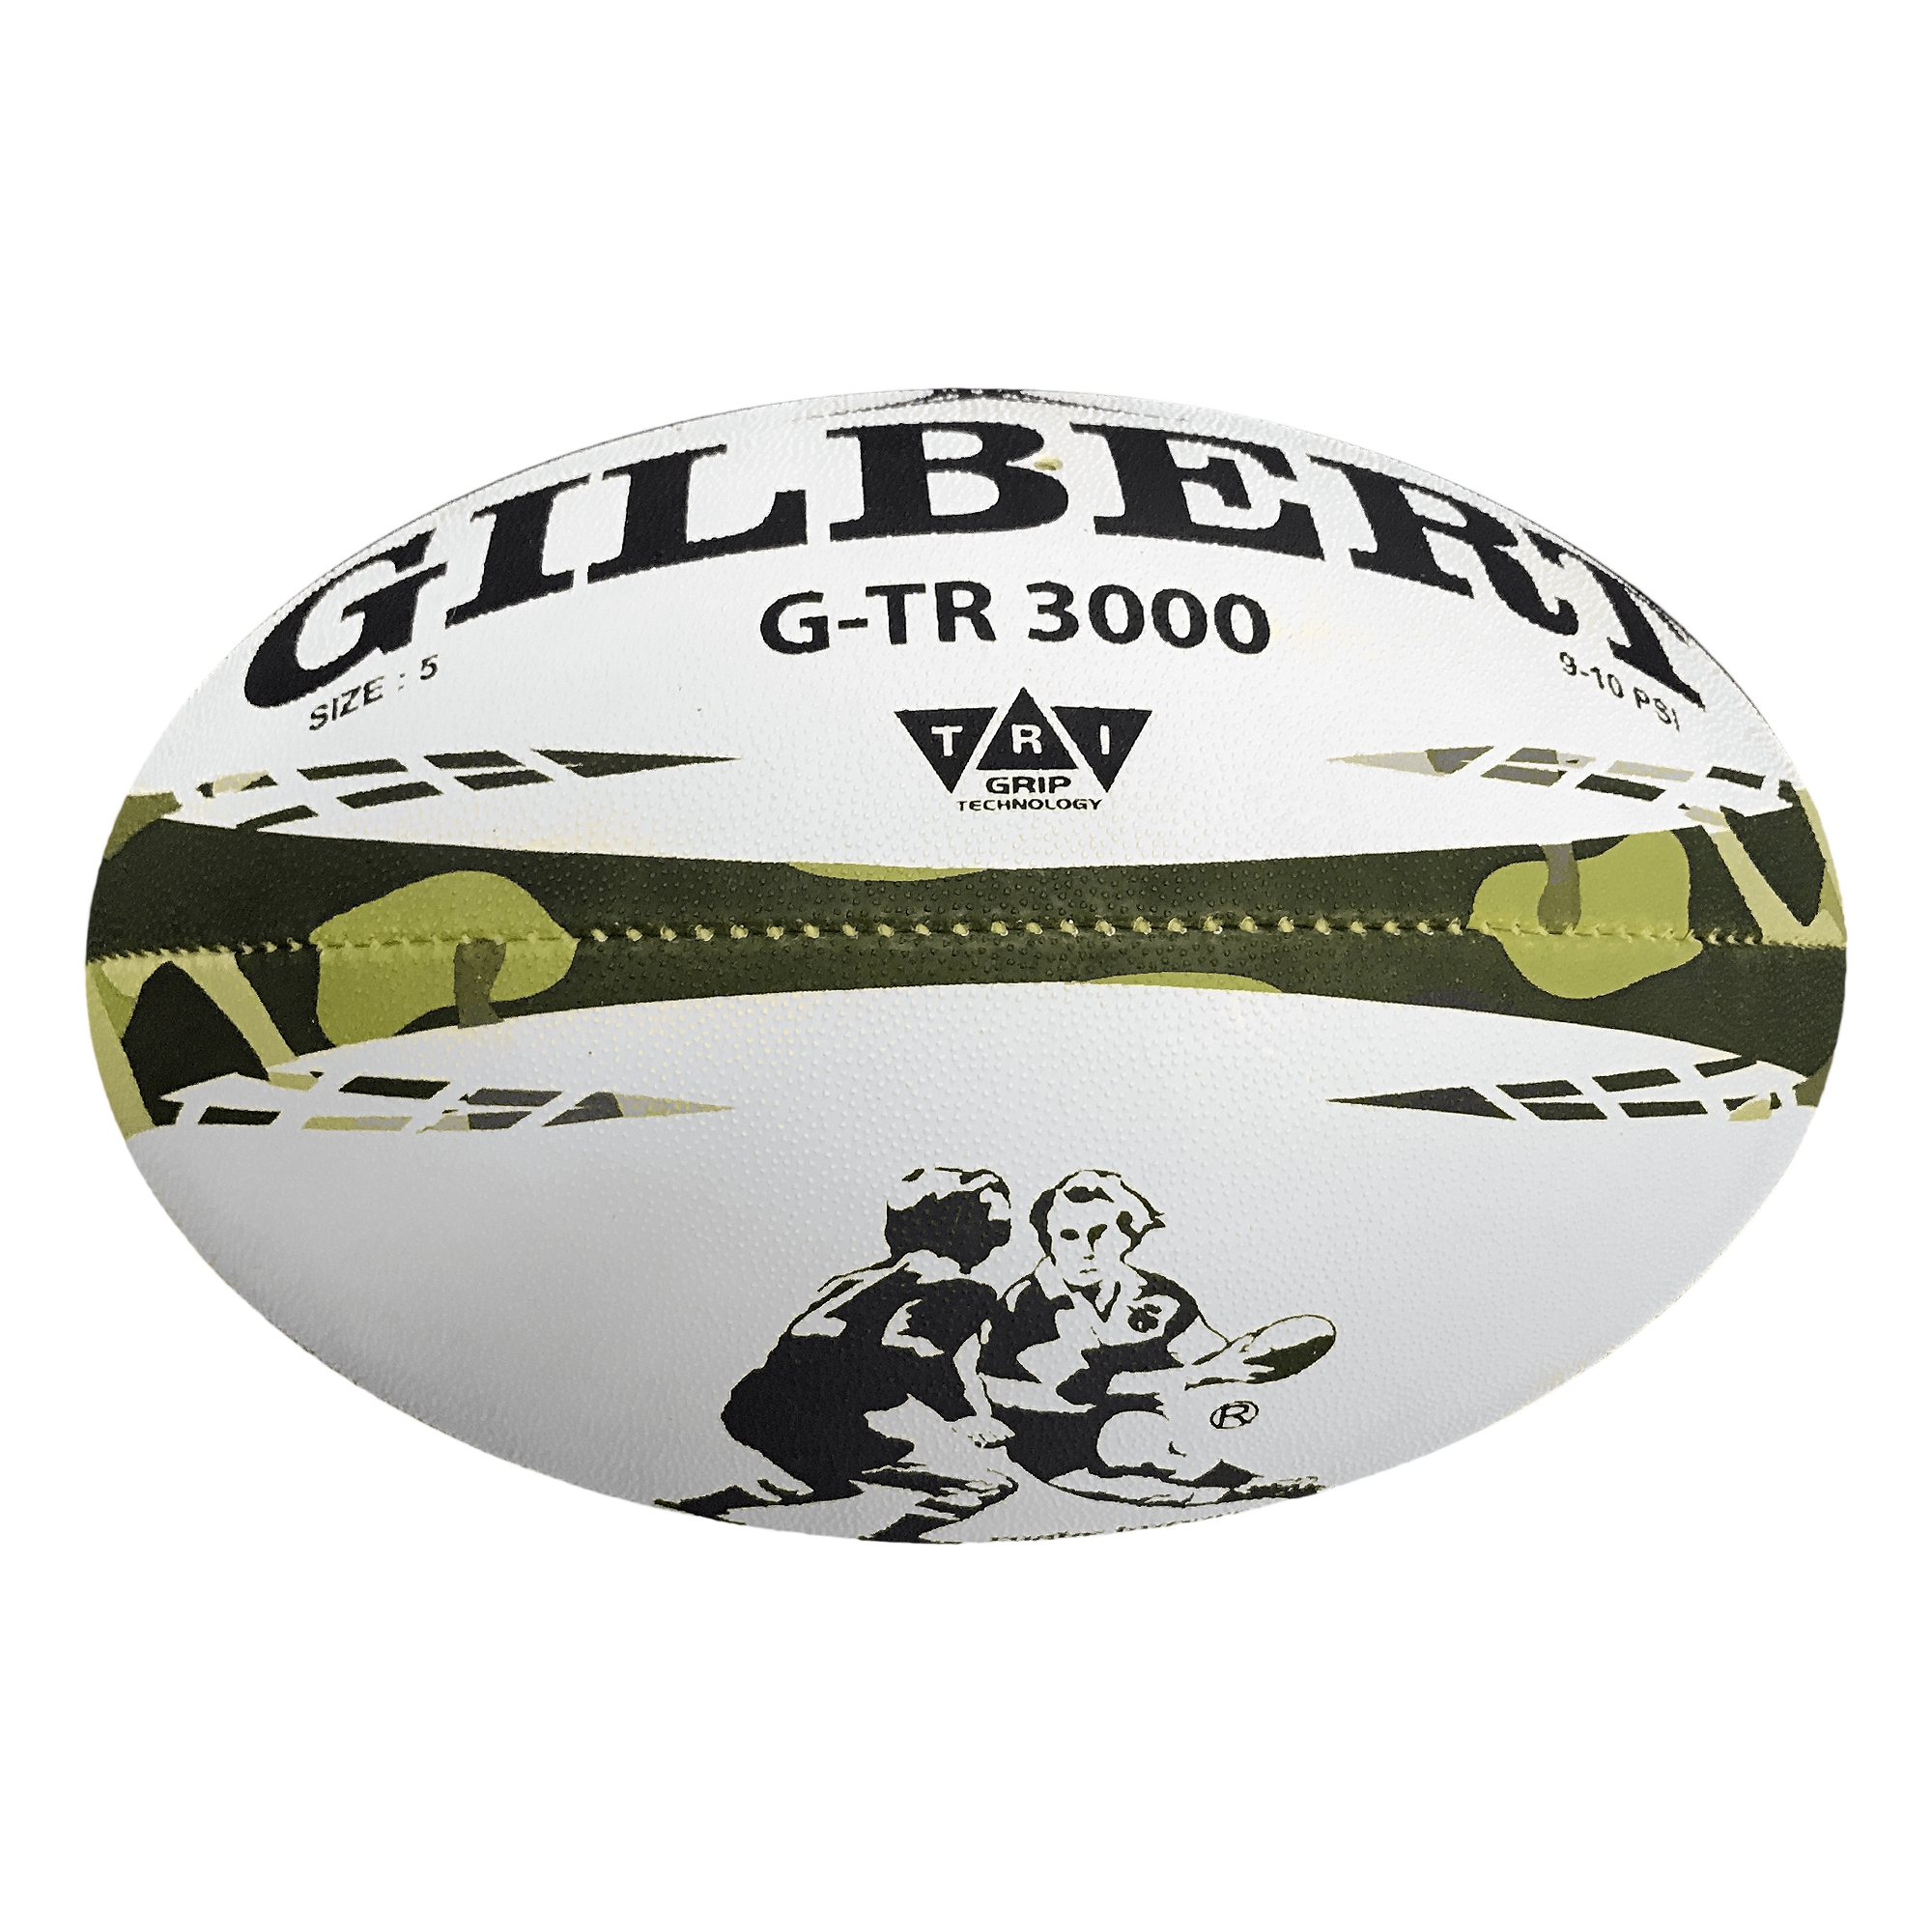 Gilbert Rugby Direct Rugby Balls Plus 5 - Standard Gilbert G-TR3000 Camo Rugby Training Ball